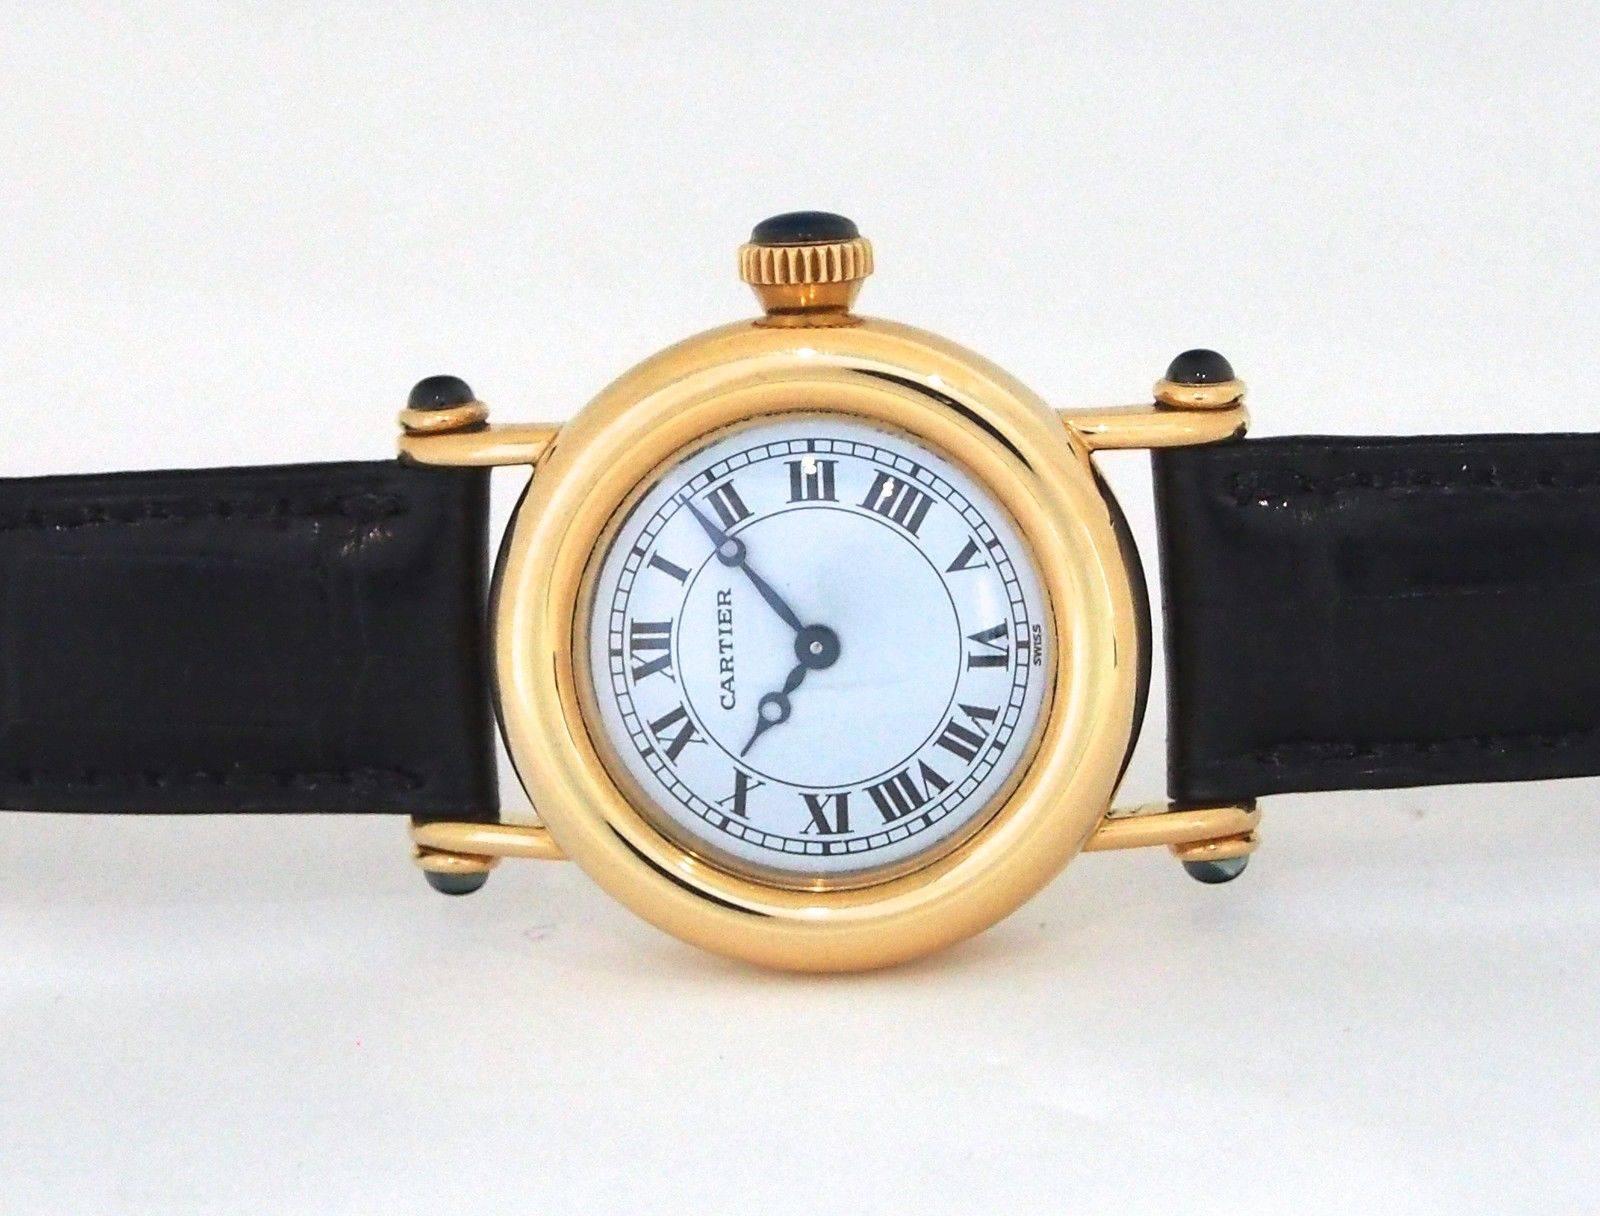 Brand Name:  Cartier
Style Number:  Ref. 1440
Also Called:  Diabolo
Series:  Diablo
Gender:  Lady's
Case Material:  18K Yellow Gold 
Dial Color:  White
Movement:  Quartz
Functions:  Hours, Minutes
Crystal Material:  Sapphire
Case Diameter: 